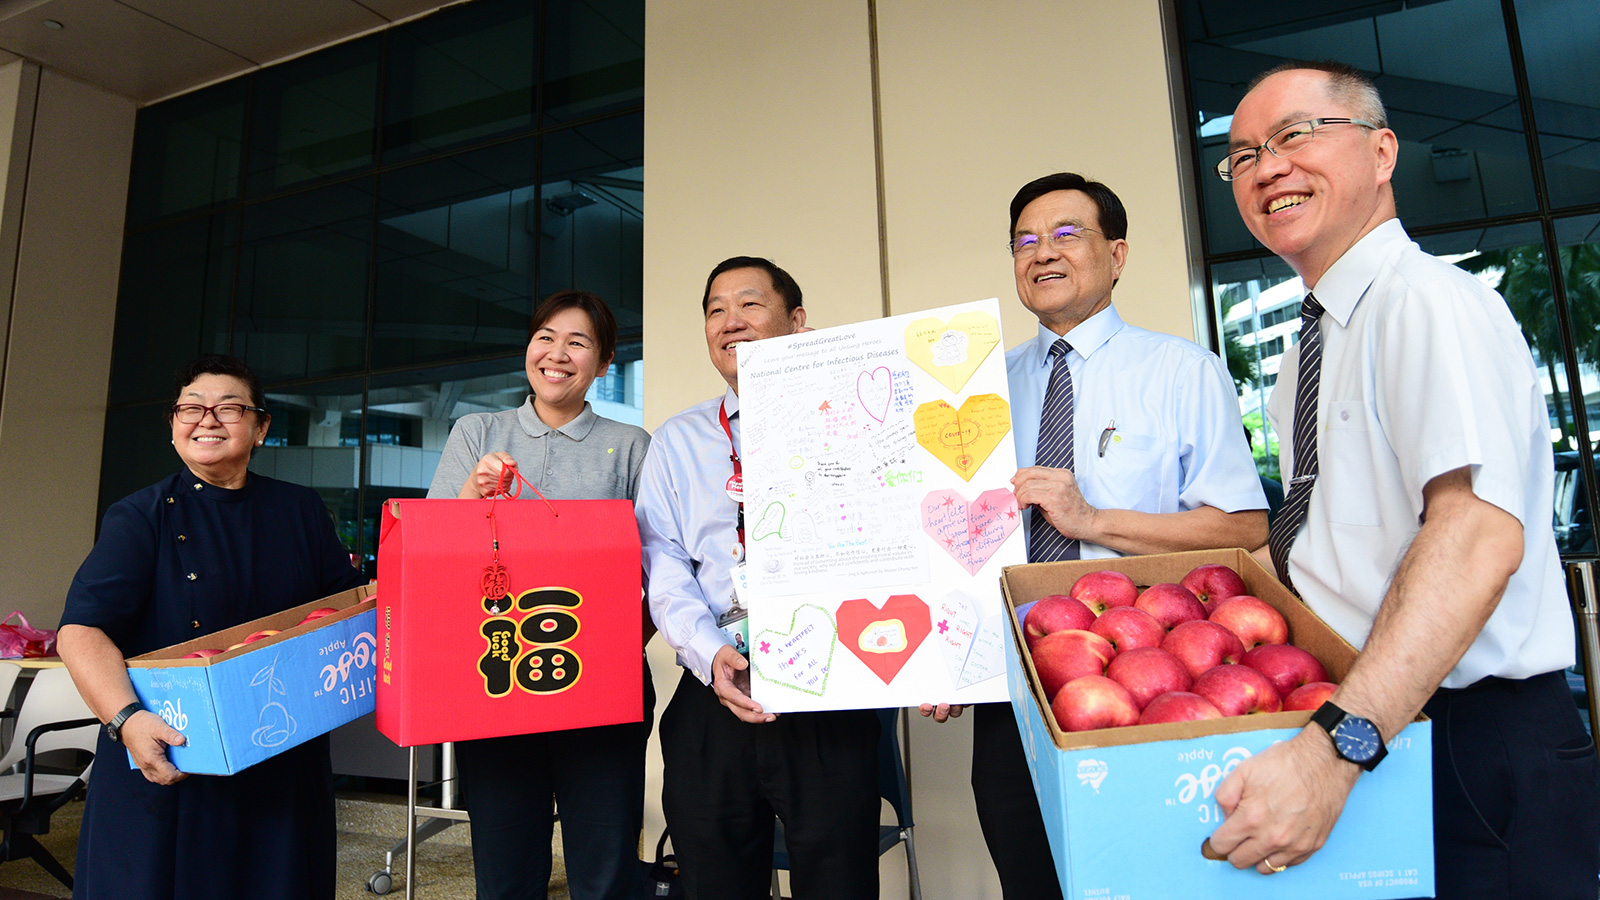 Tzu Chi CEO Mr Low Swee Seh (second from right) and volunteer representatives are handing over gift packs, apples and a large greeting card to Associate Professor Chin Jing Jih (middle), the Chairman of the Medical Board of Tan Tock Seng Hospital.